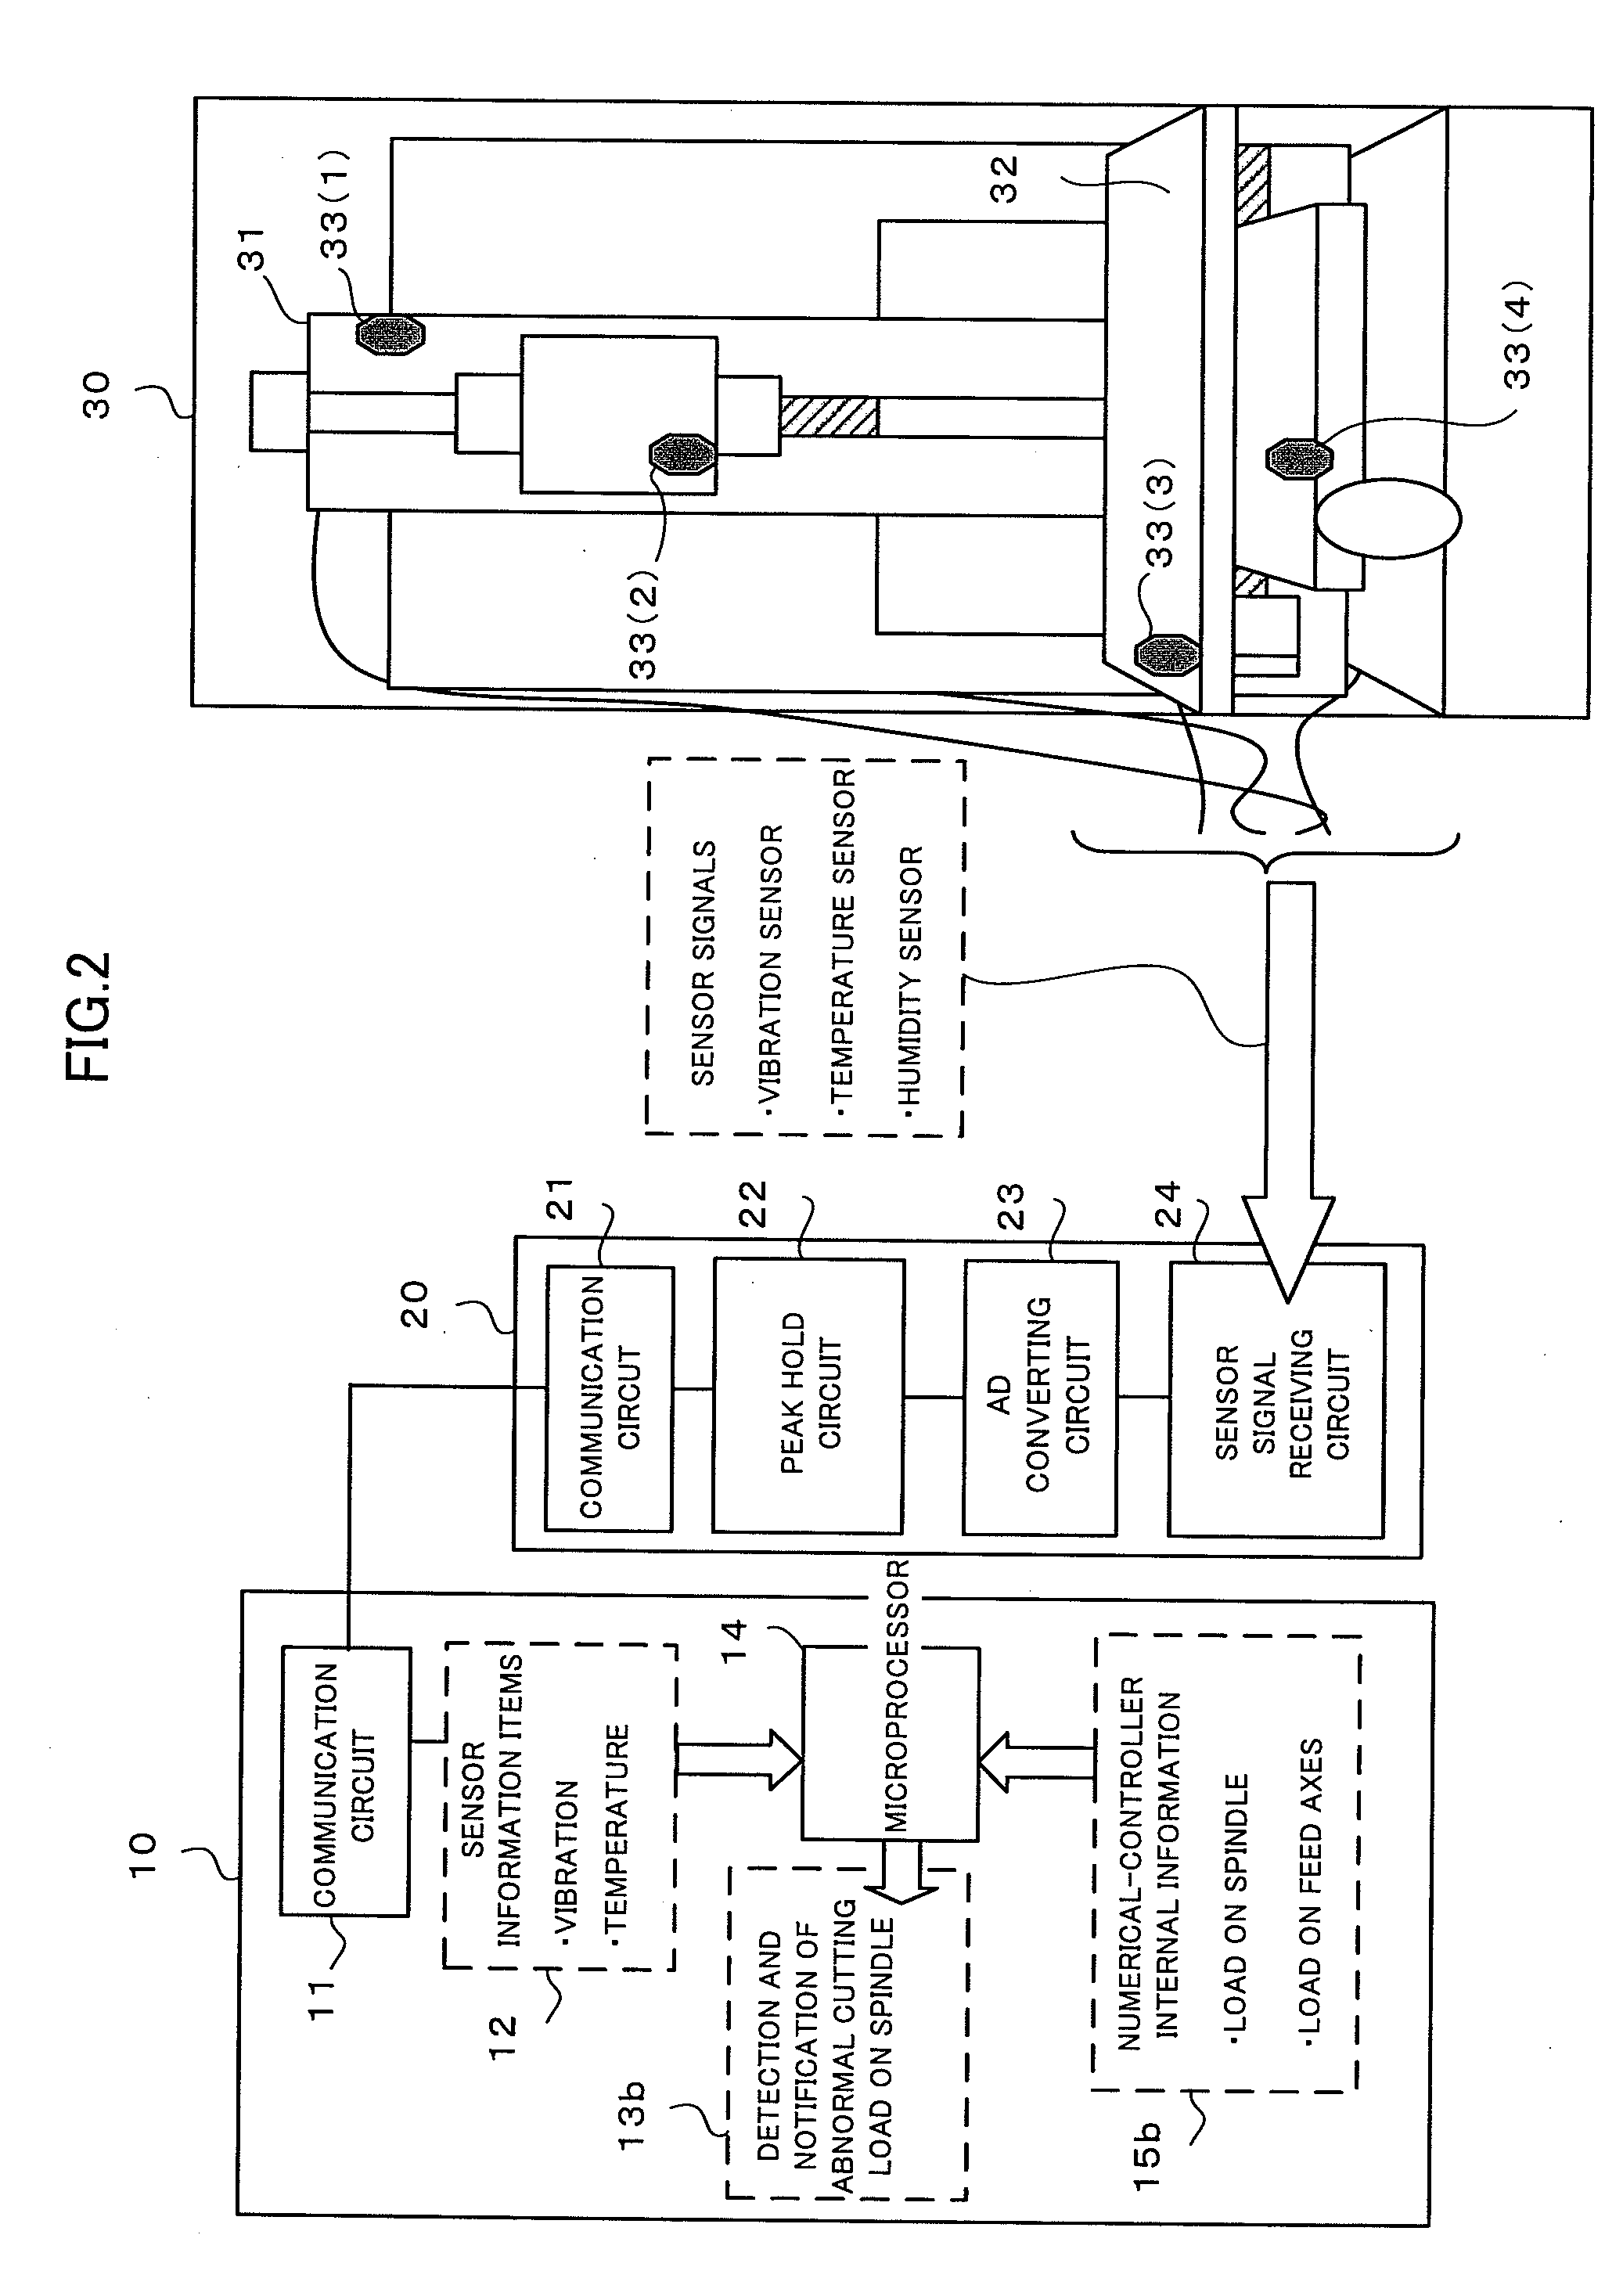 Numerical controller having a function for determining machine abnormality from signals obtained from a plurality of sensors